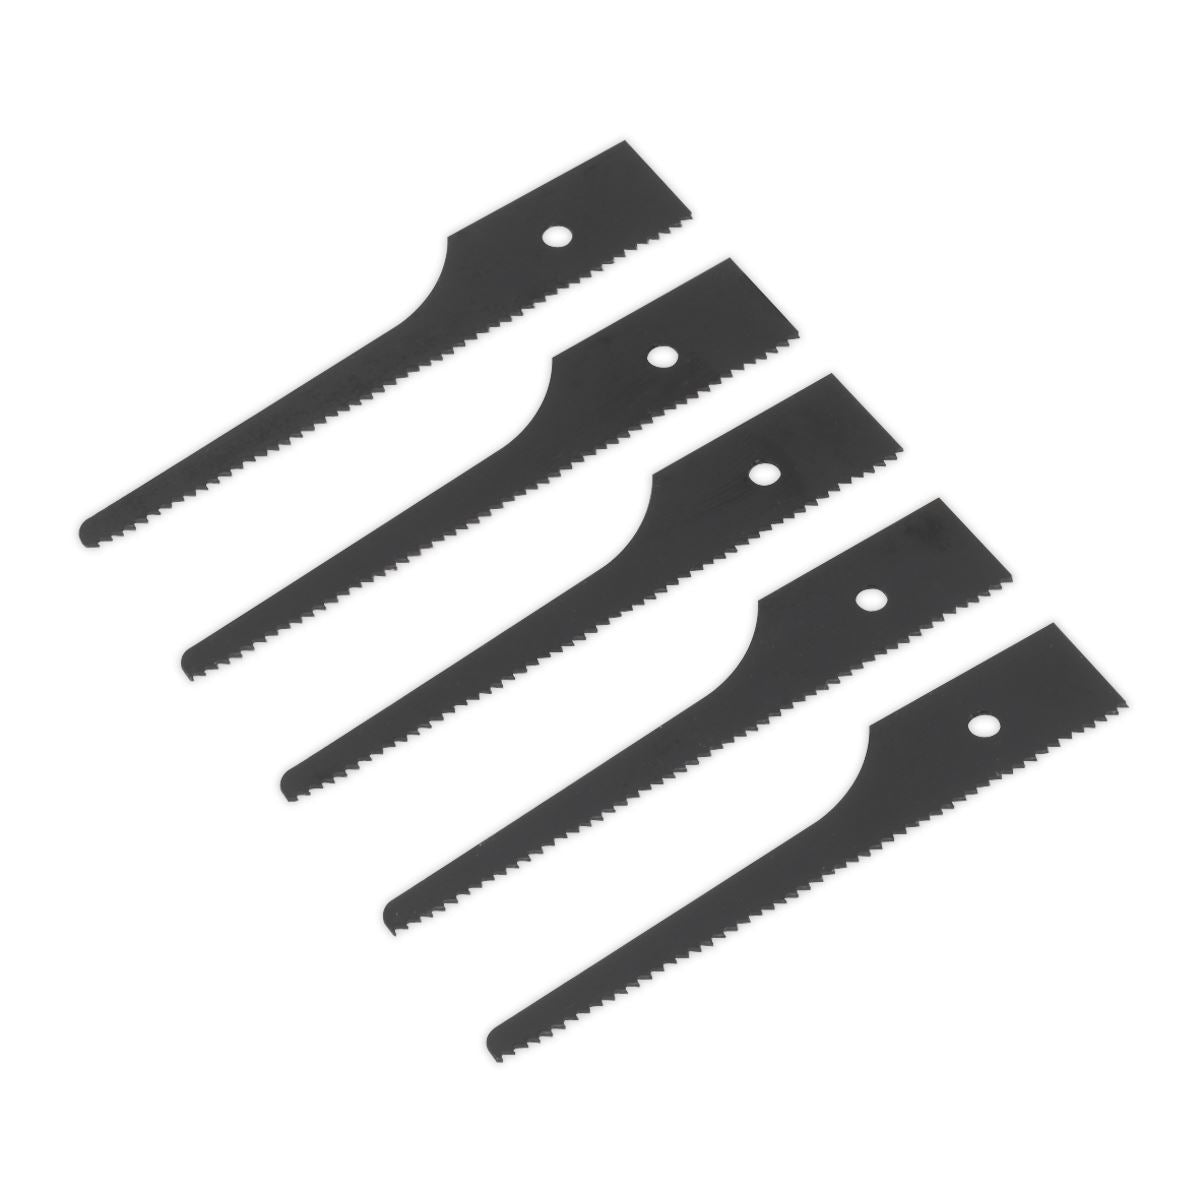 Sealey 74mm Air Saw Blade 18tpi  - Pack of 5